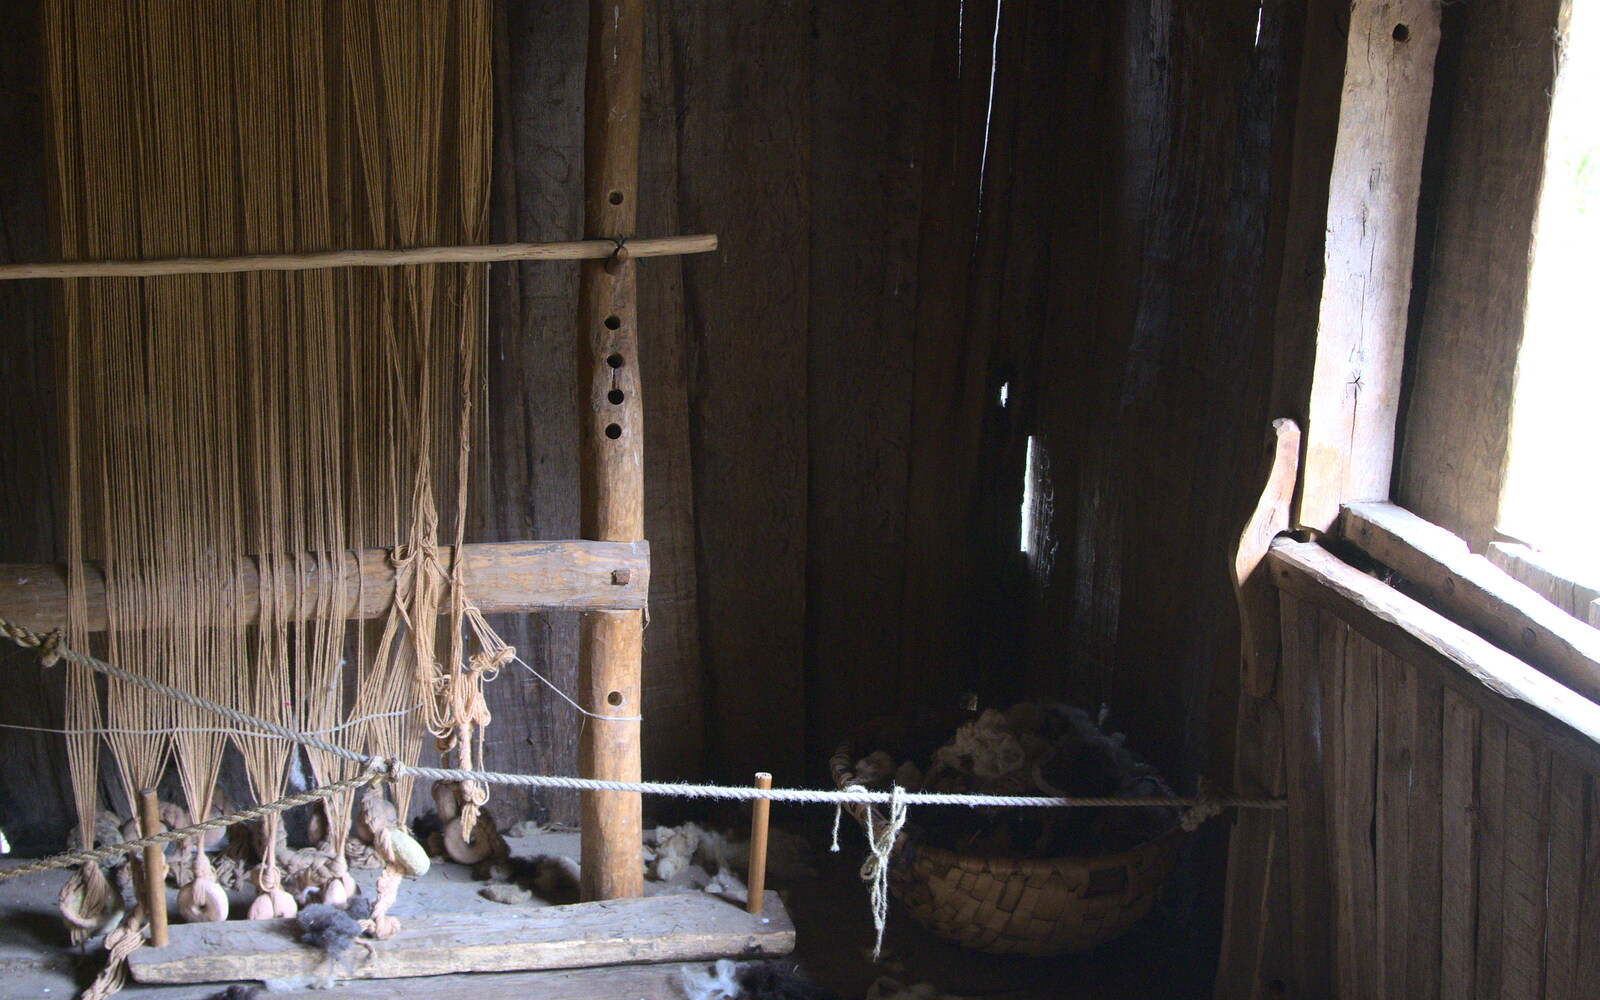 A Saxon loom from An Anglo-Saxon Village, West Stow, Suffolk - 19th February 2017